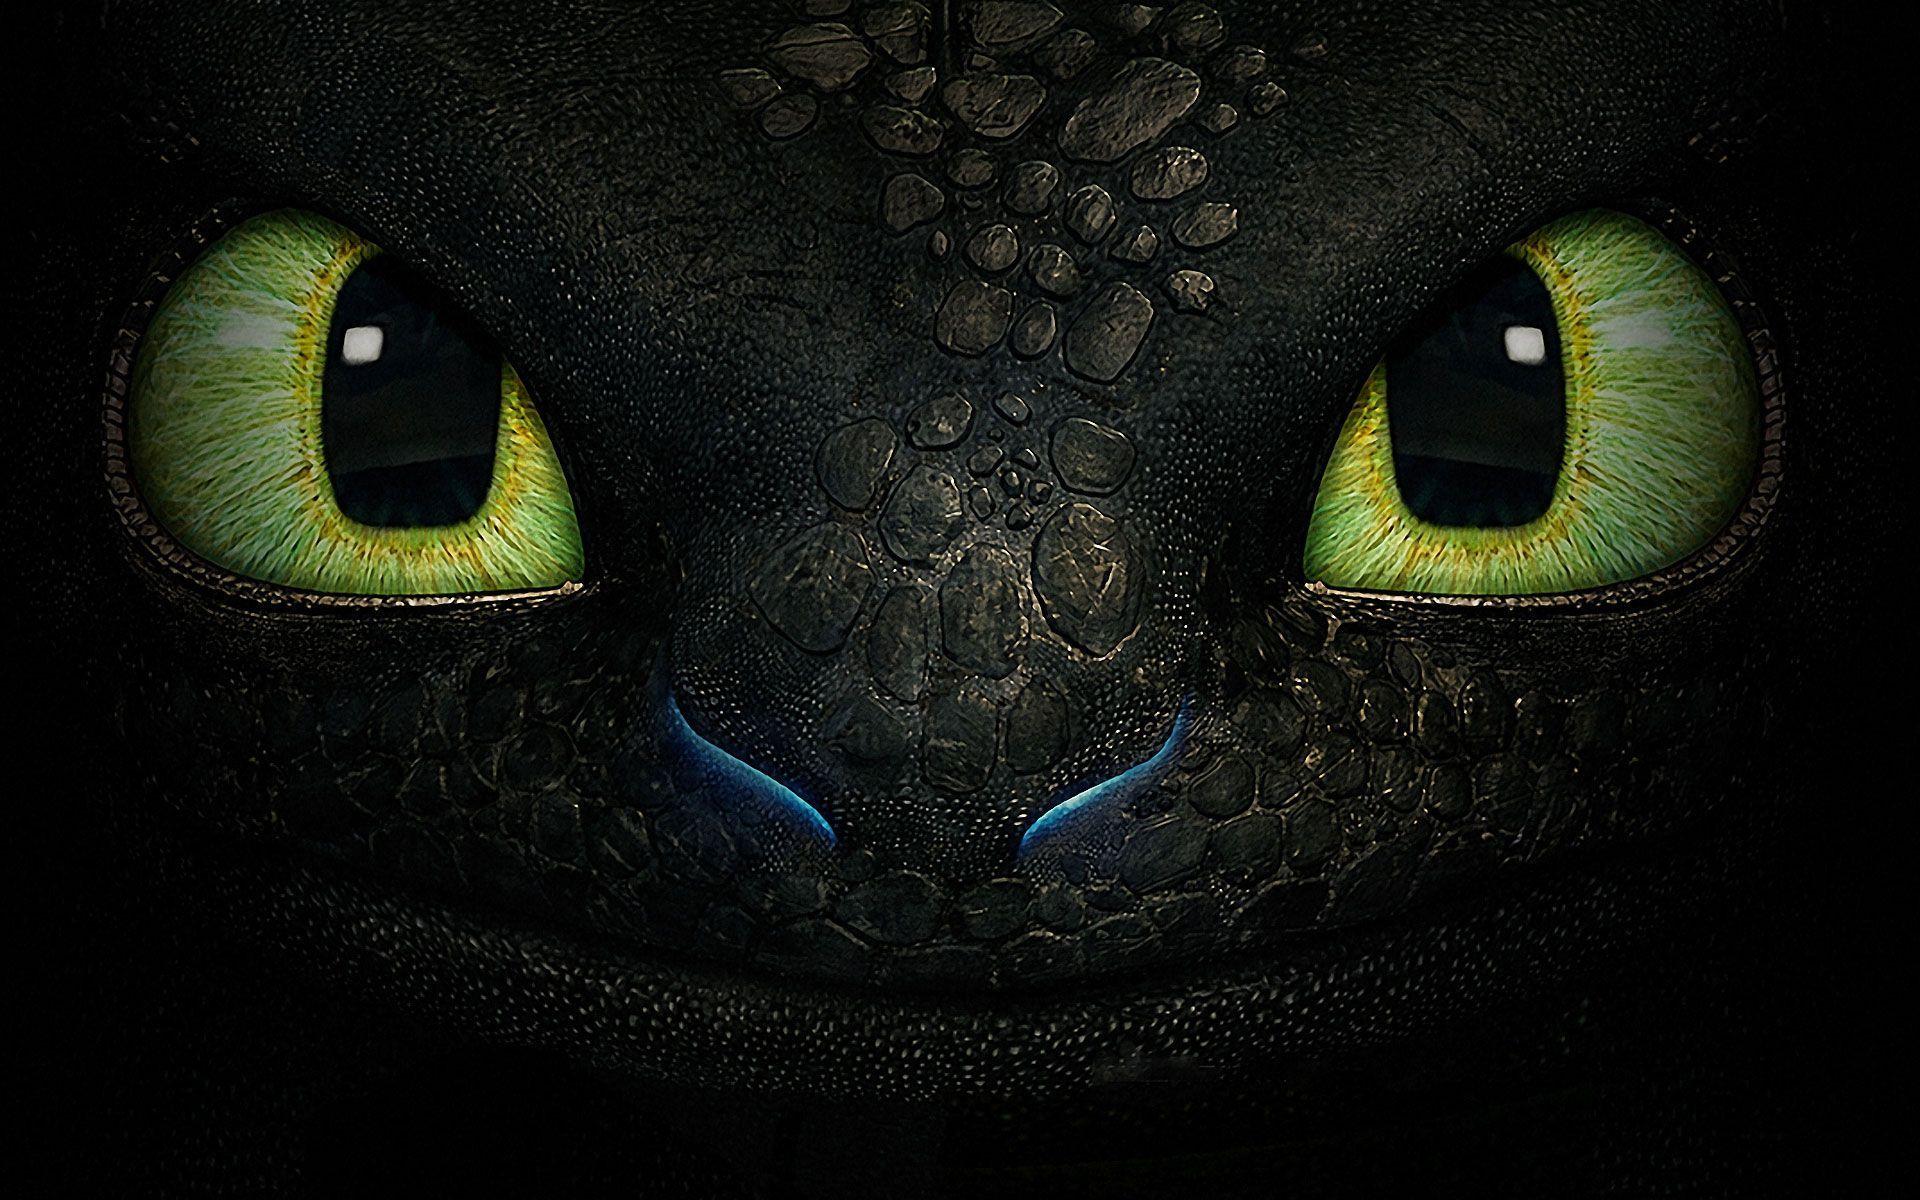 How to Train Your Dragon 2 Wallpaper HD Collection. Toothless